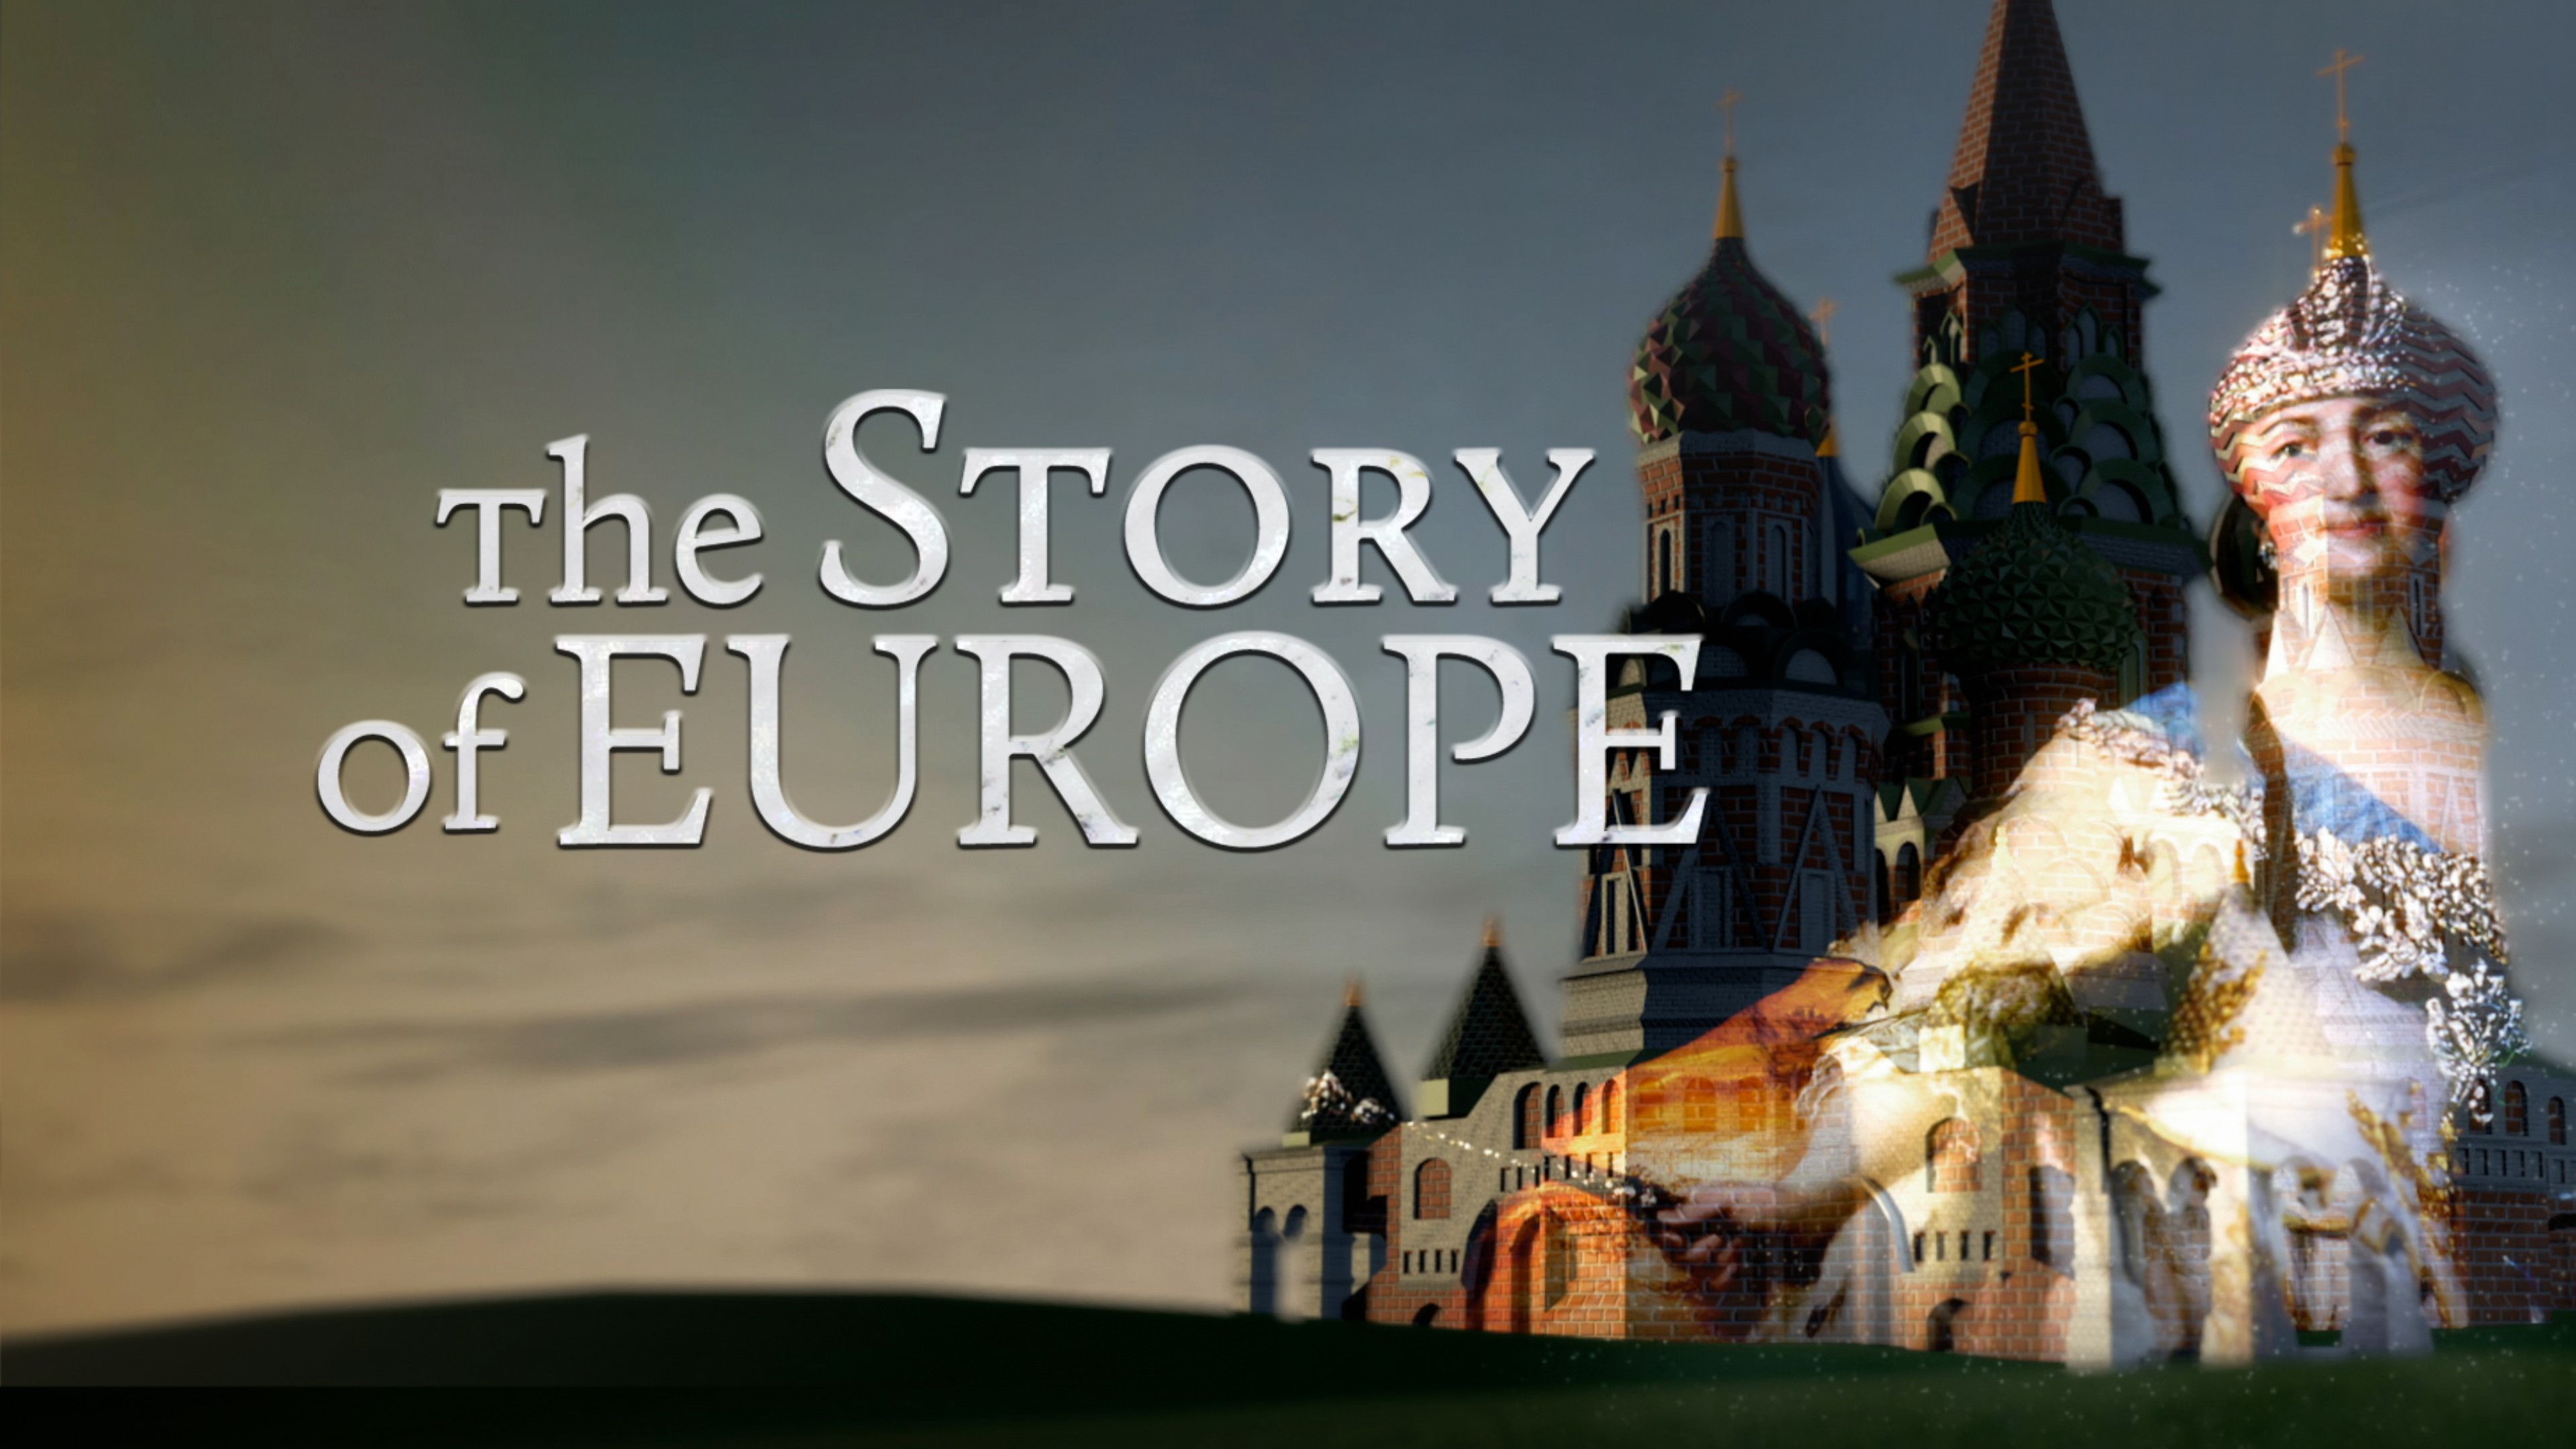 The Story of Europe with Historian Dr. Christopher Clark